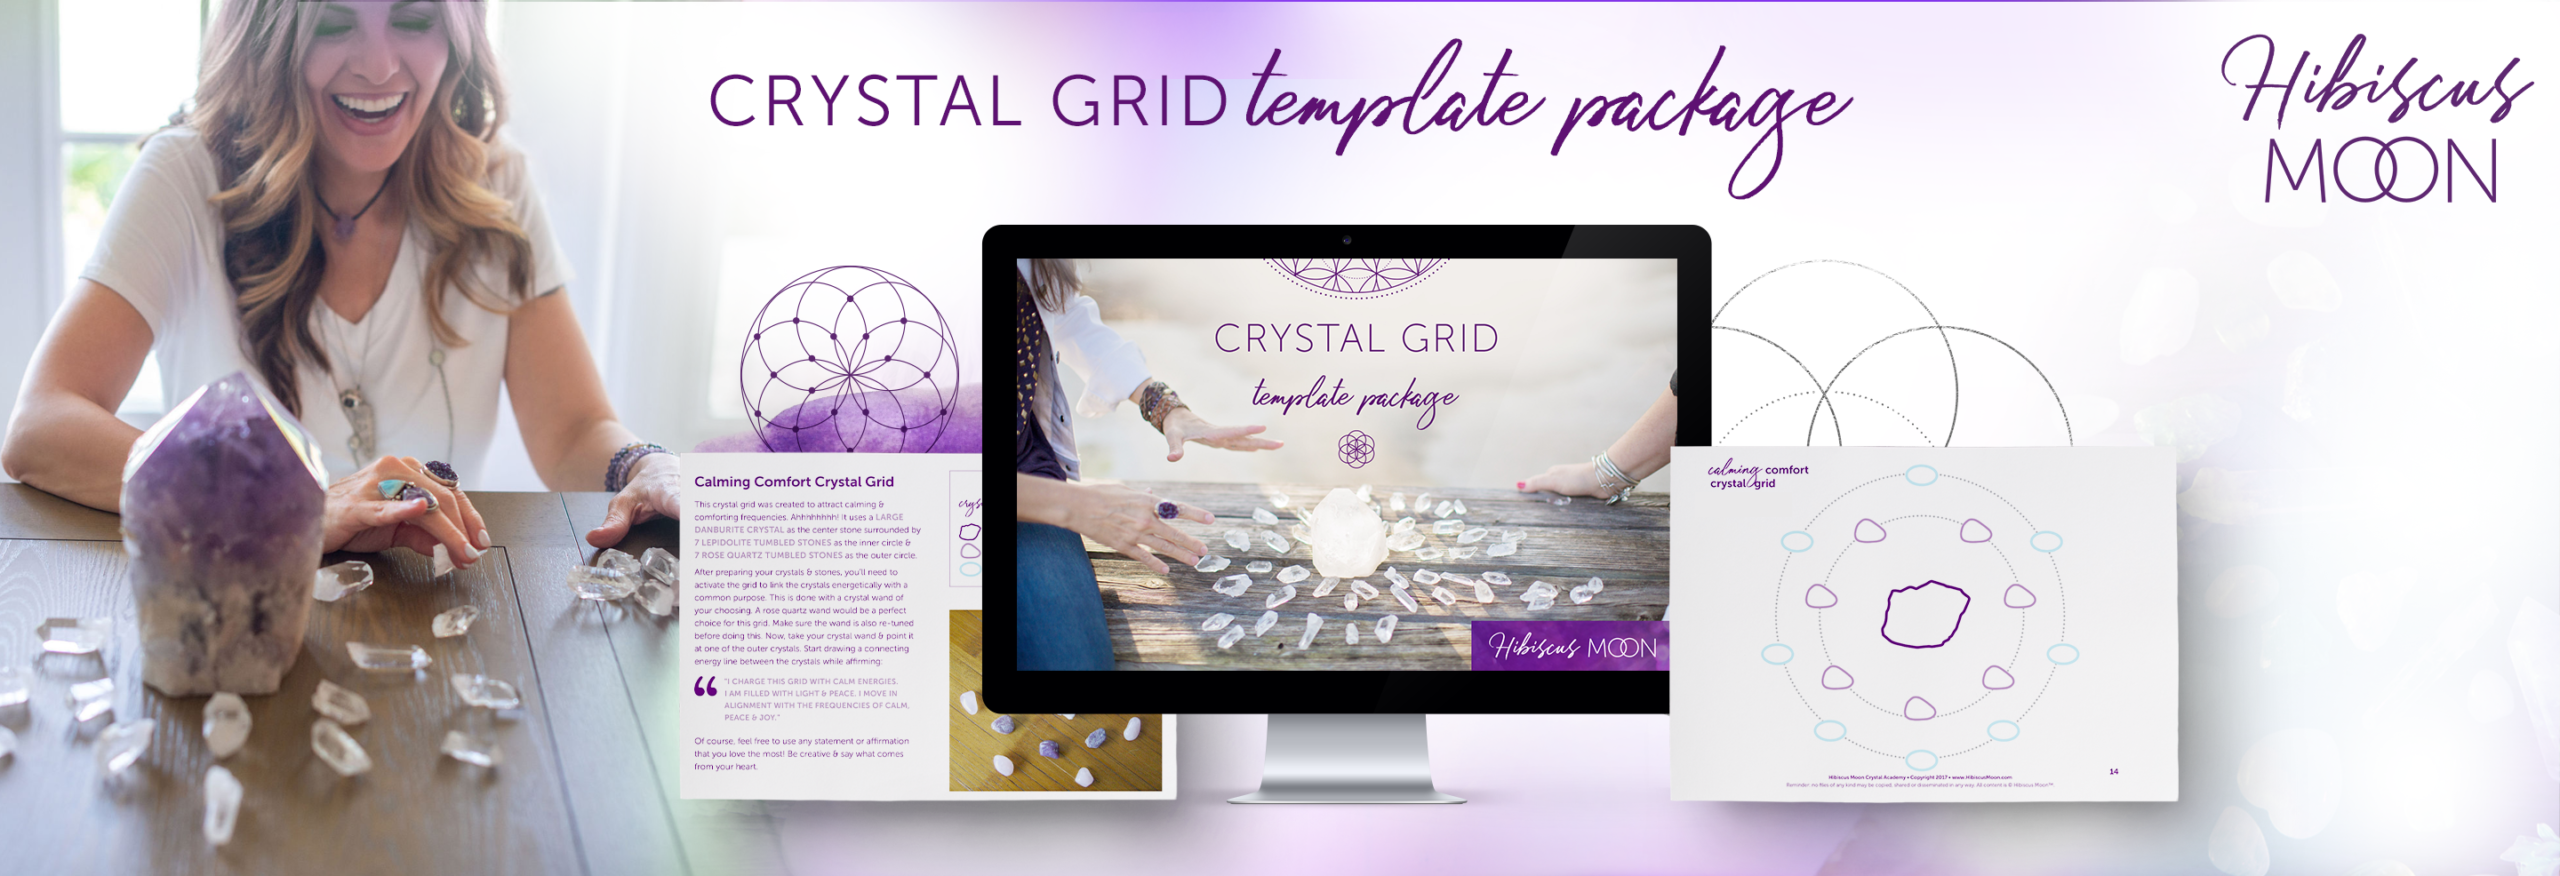 Crystal Grids Template Package